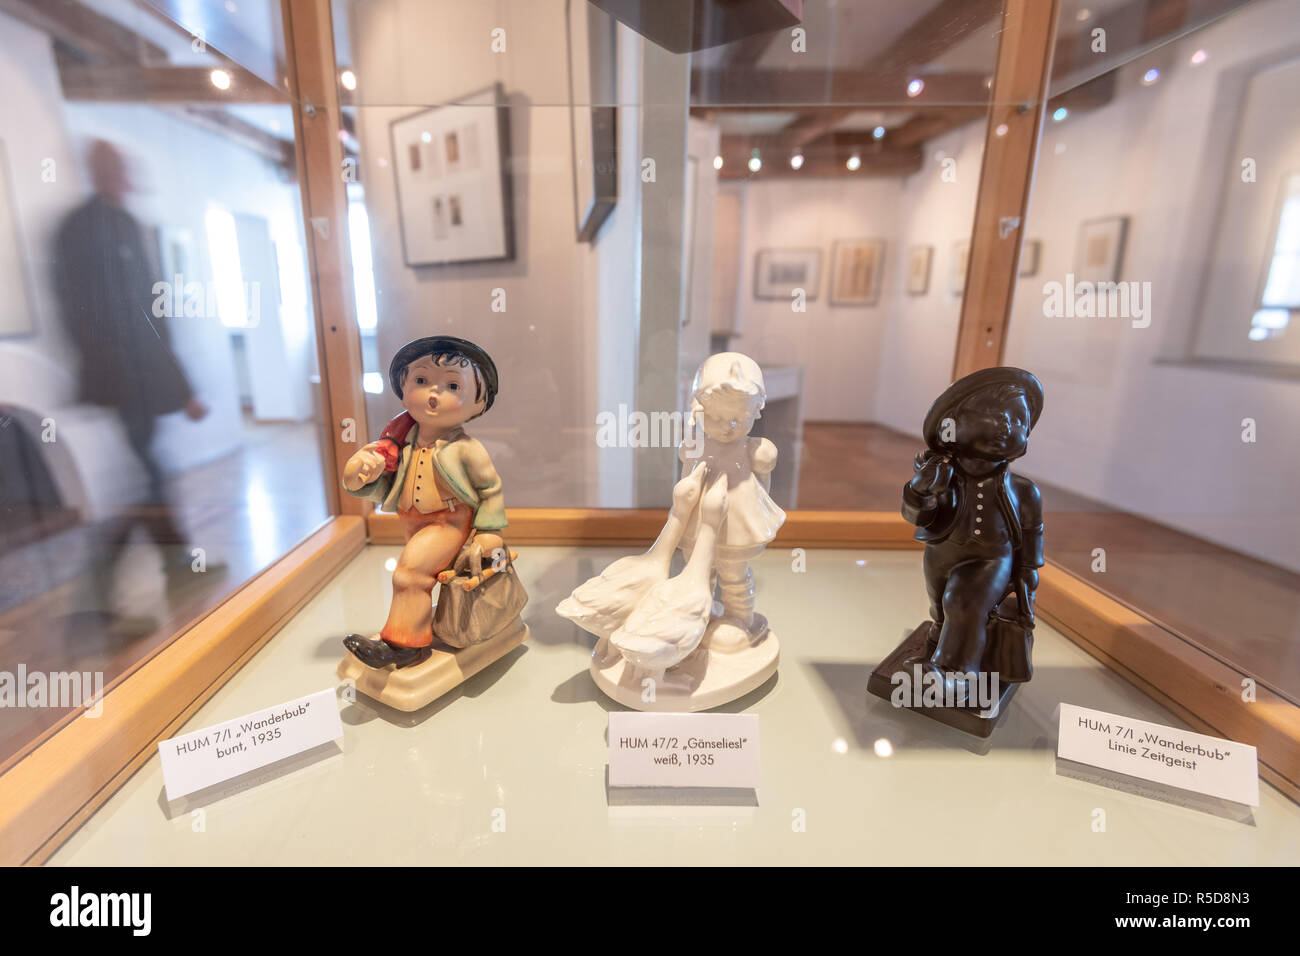 Massing, Germany. 29th Nov, 2018. The Hummel porcelain figures "Wanderbub", "Gänseliesl" and "Wanderbub Linie Zeitgeist" are displayed in a showcase in the Berta Hummel Museum. The museum is to be saved